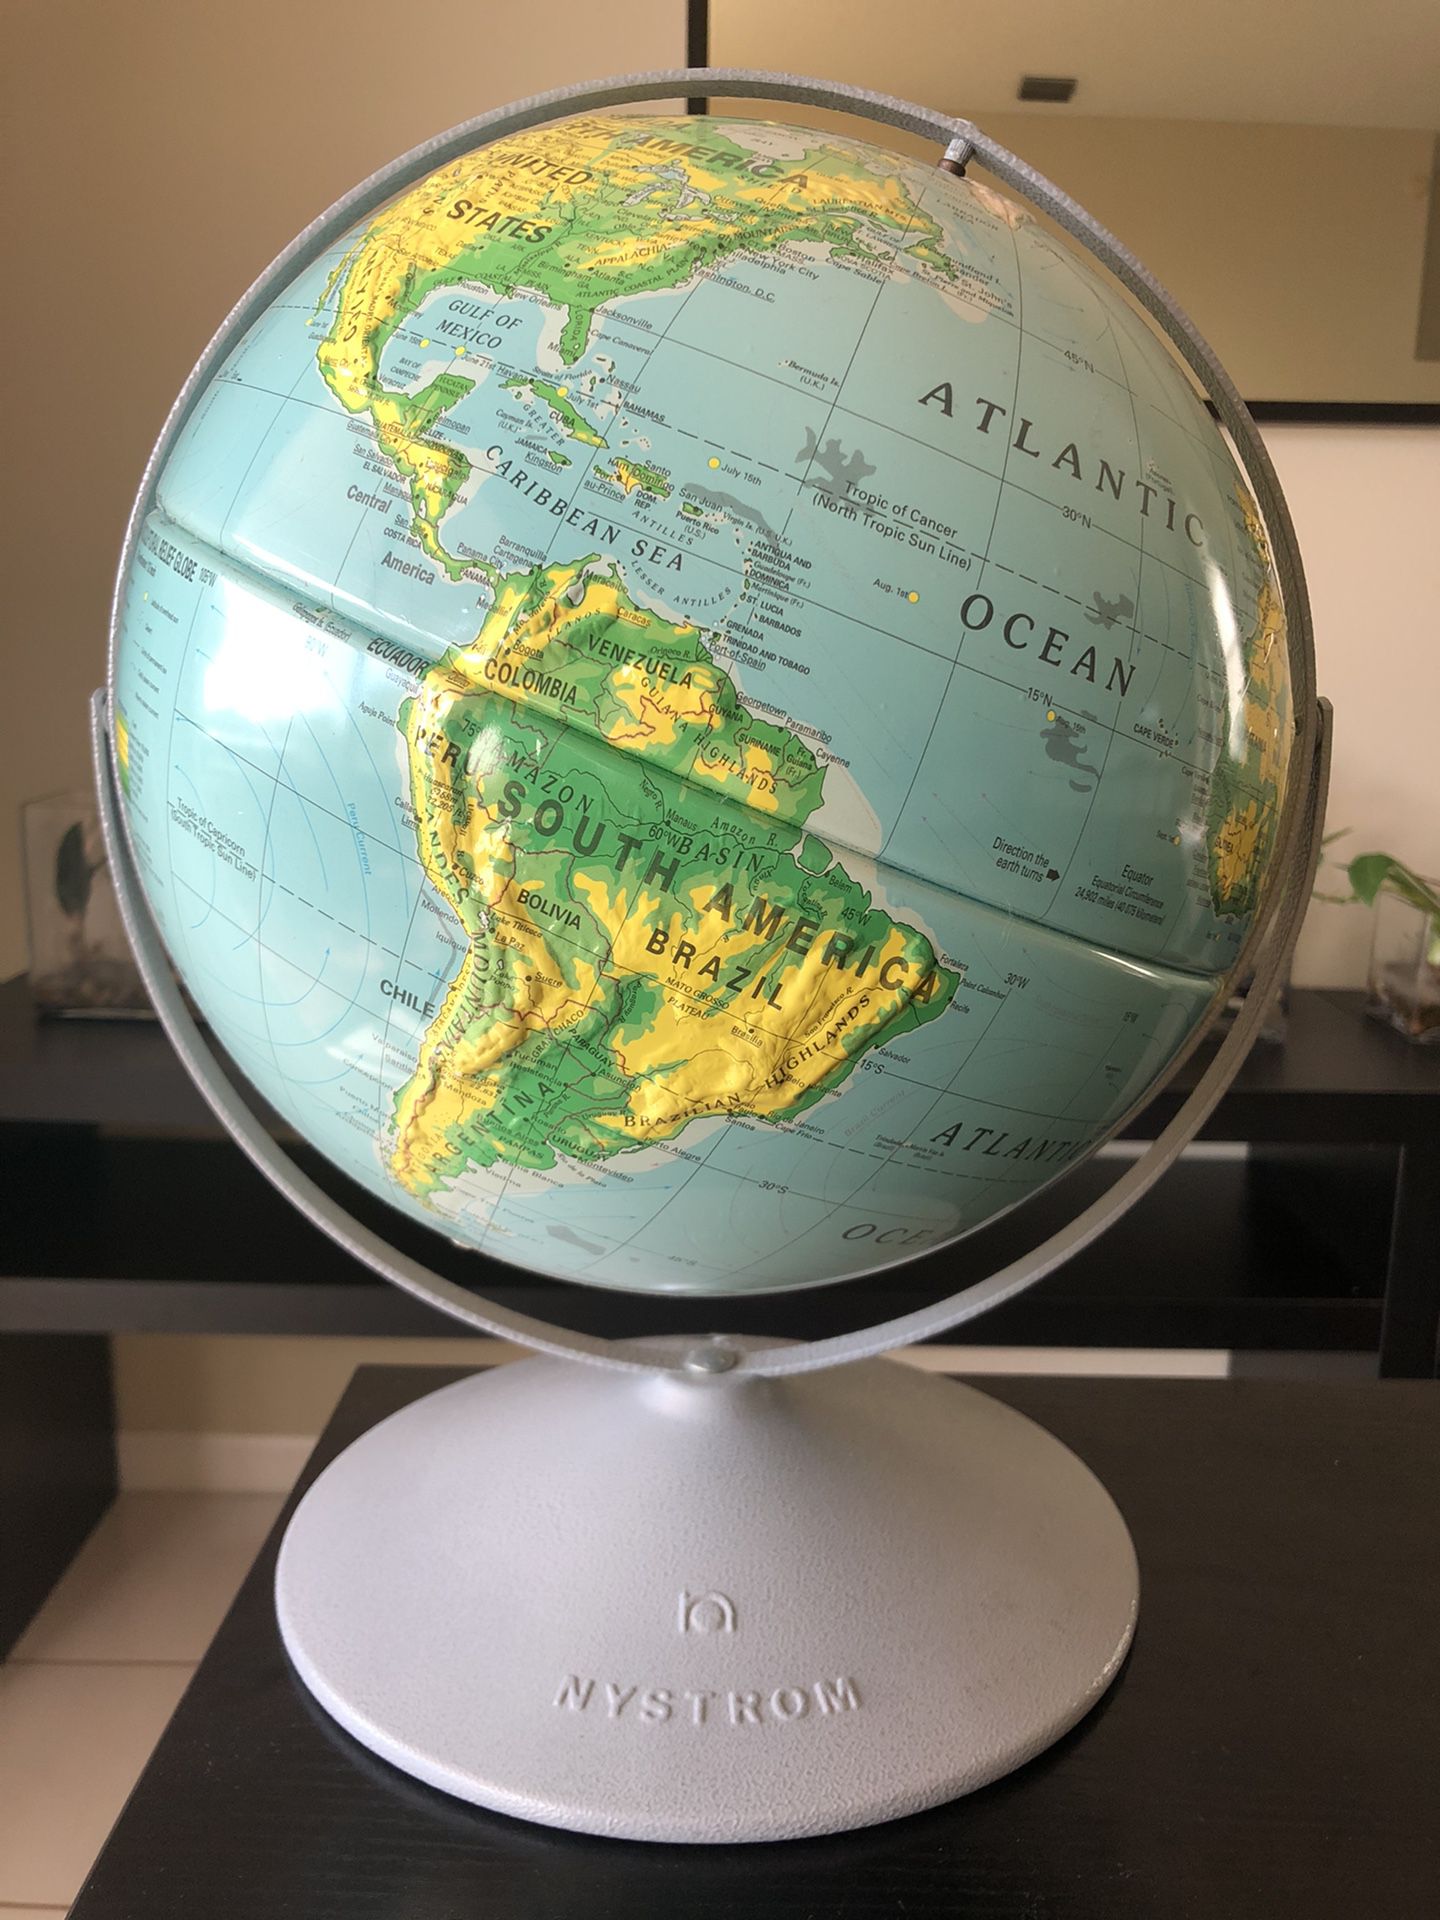 World Globe Nystrom Dual Rotating Axis 12" High Raised Relief Medal Base